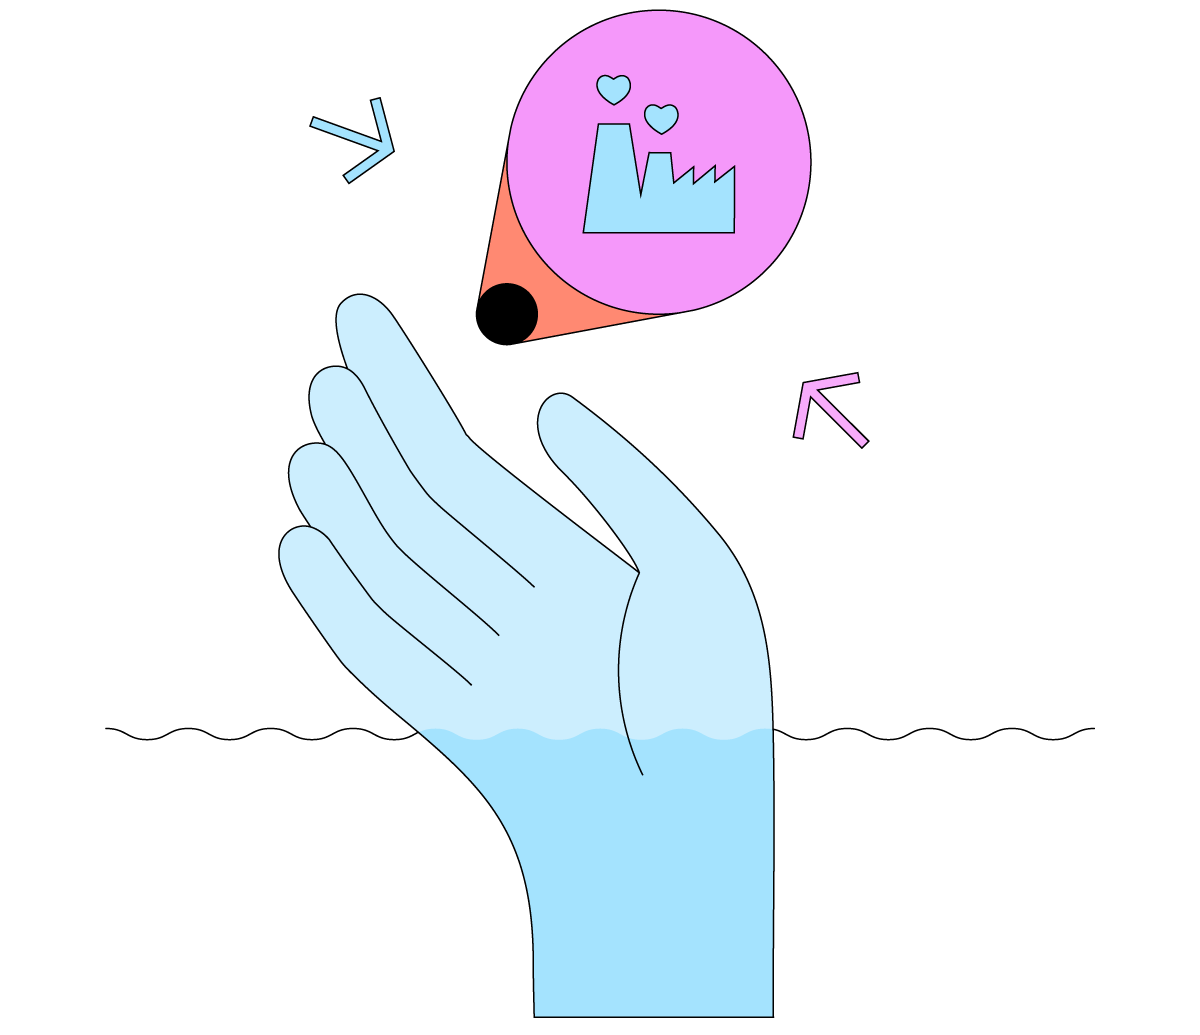 Cartoon graphic of the ocean and a hand holding up a sign of a factory. Instead of smoke, the factory emits hearts, linking the image to the mega-trend Better Business